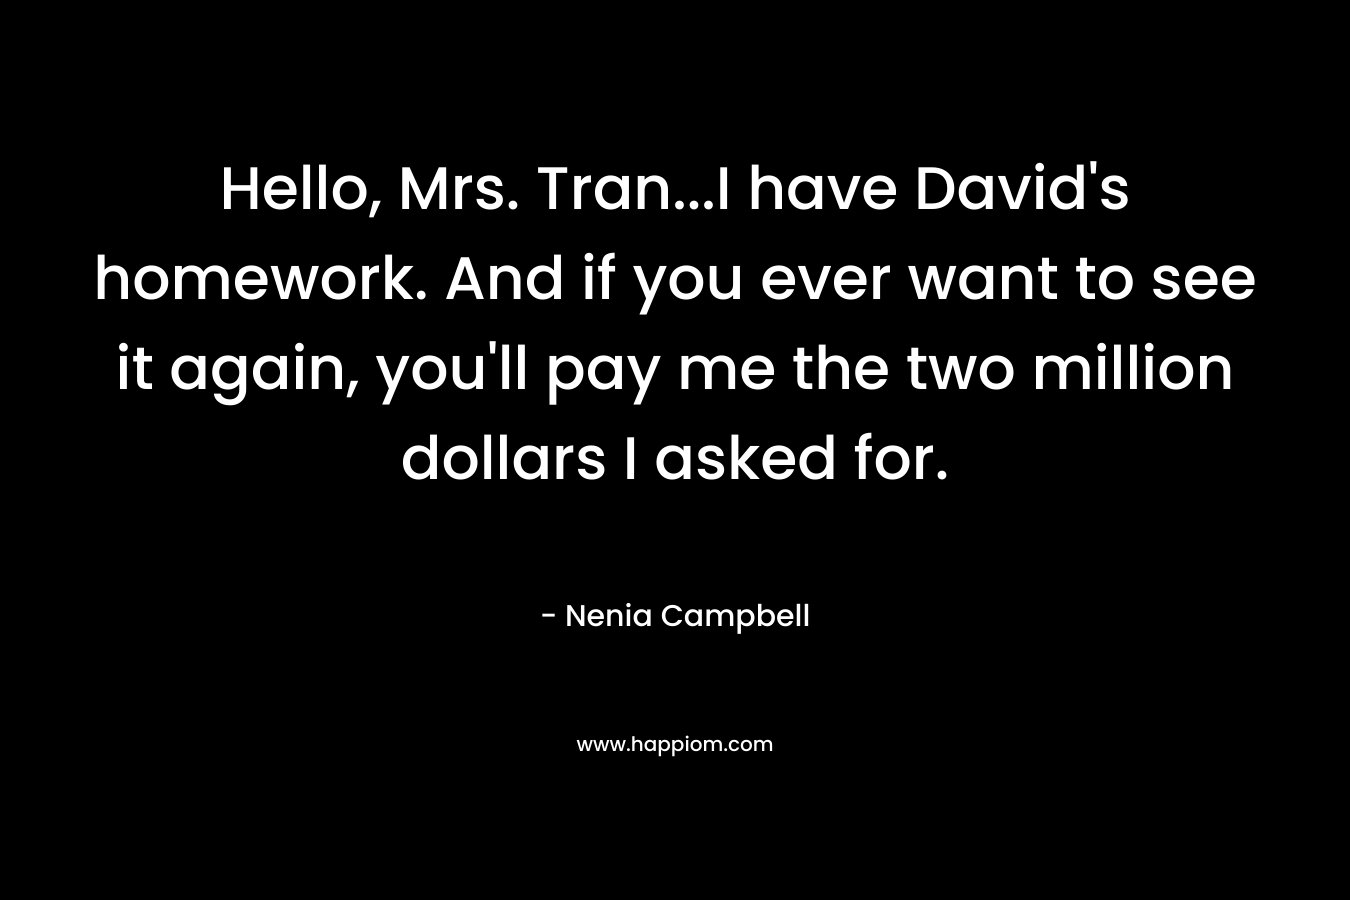 Hello, Mrs. Tran…I have David’s homework. And if you ever want to see it again, you’ll pay me the two million dollars I asked for. – Nenia Campbell